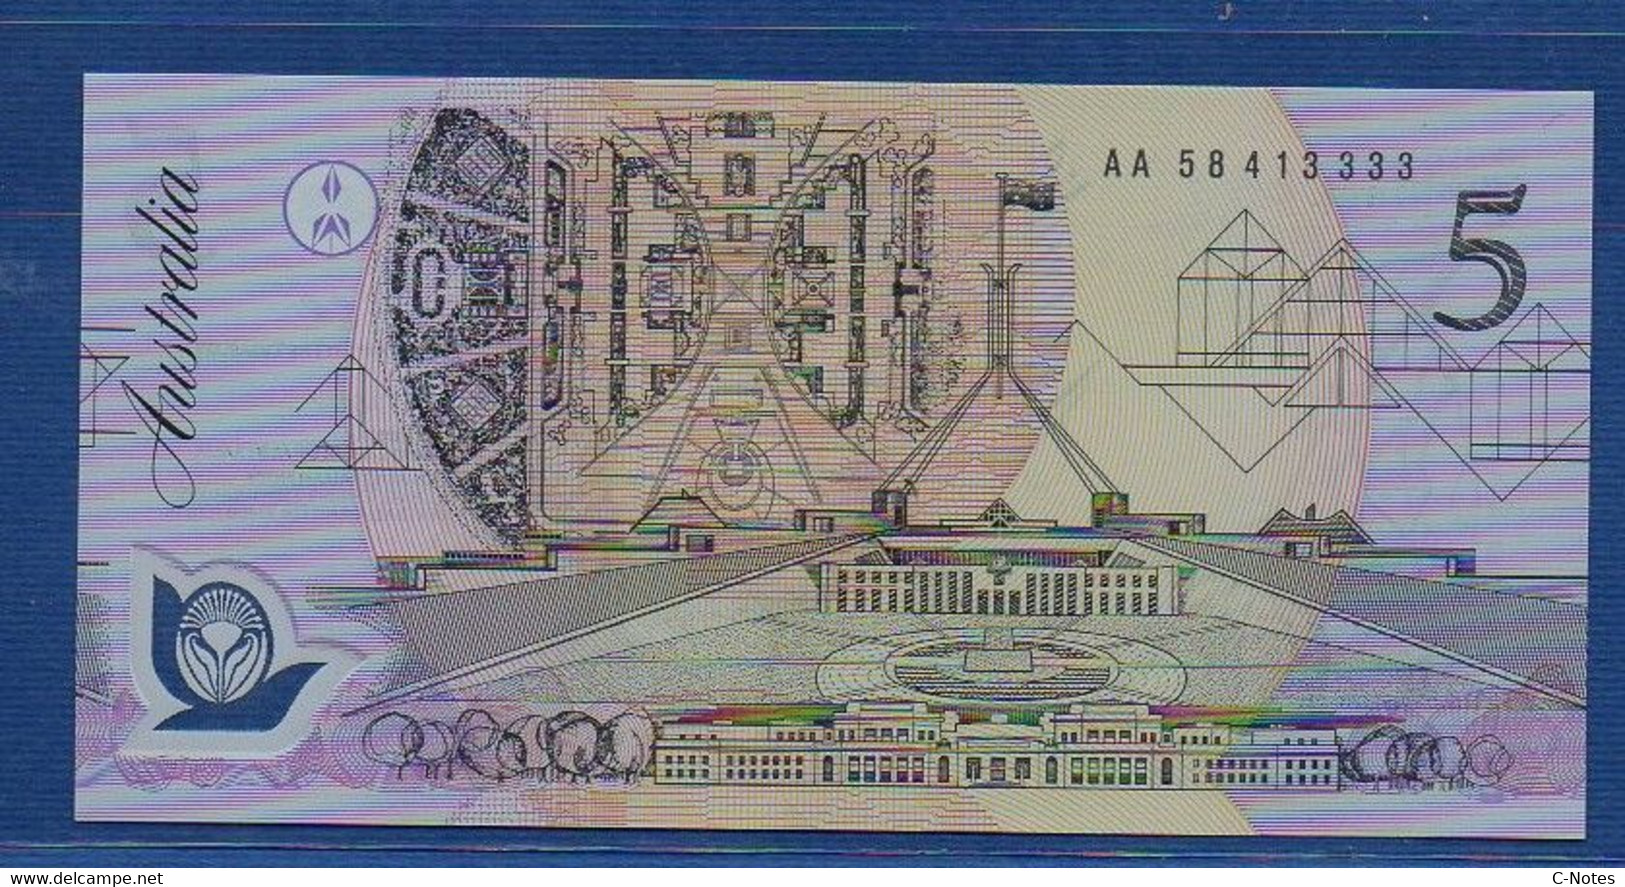 AUSTRALIA - P.50a1 - 5 Dollars 1992 UNC, Serie AA 58 413333 - 1992-2001 (polymer Notes)